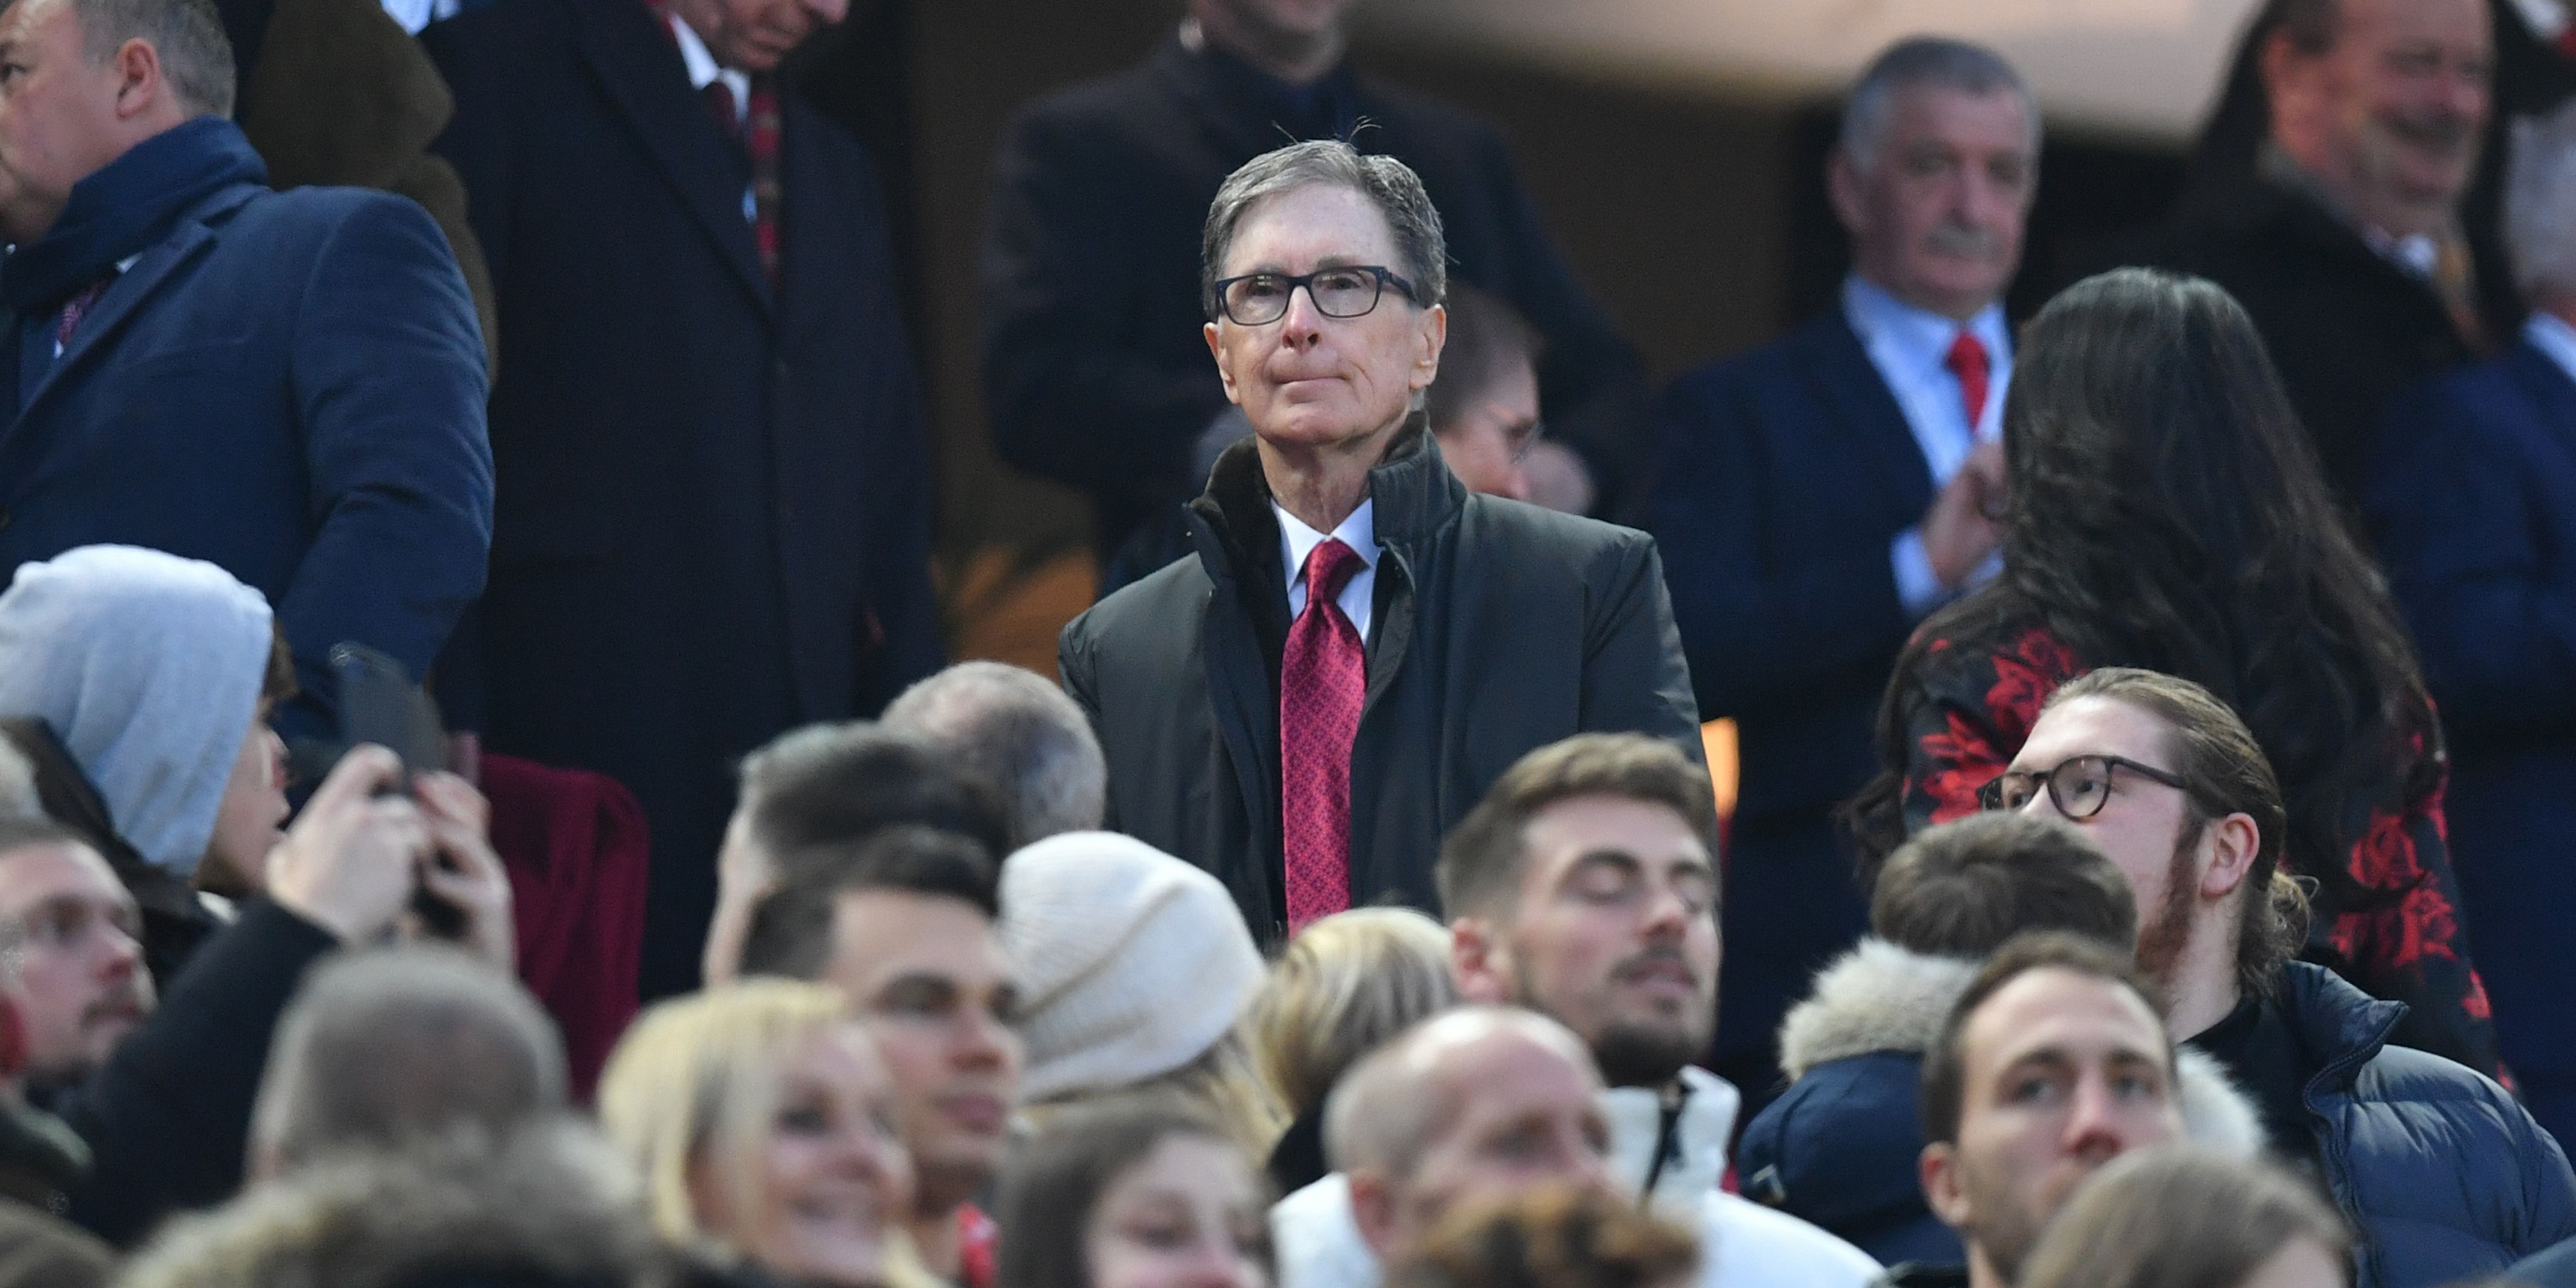 FSG insider shares what John W. Henry and Co. think about potential Liverpool sale